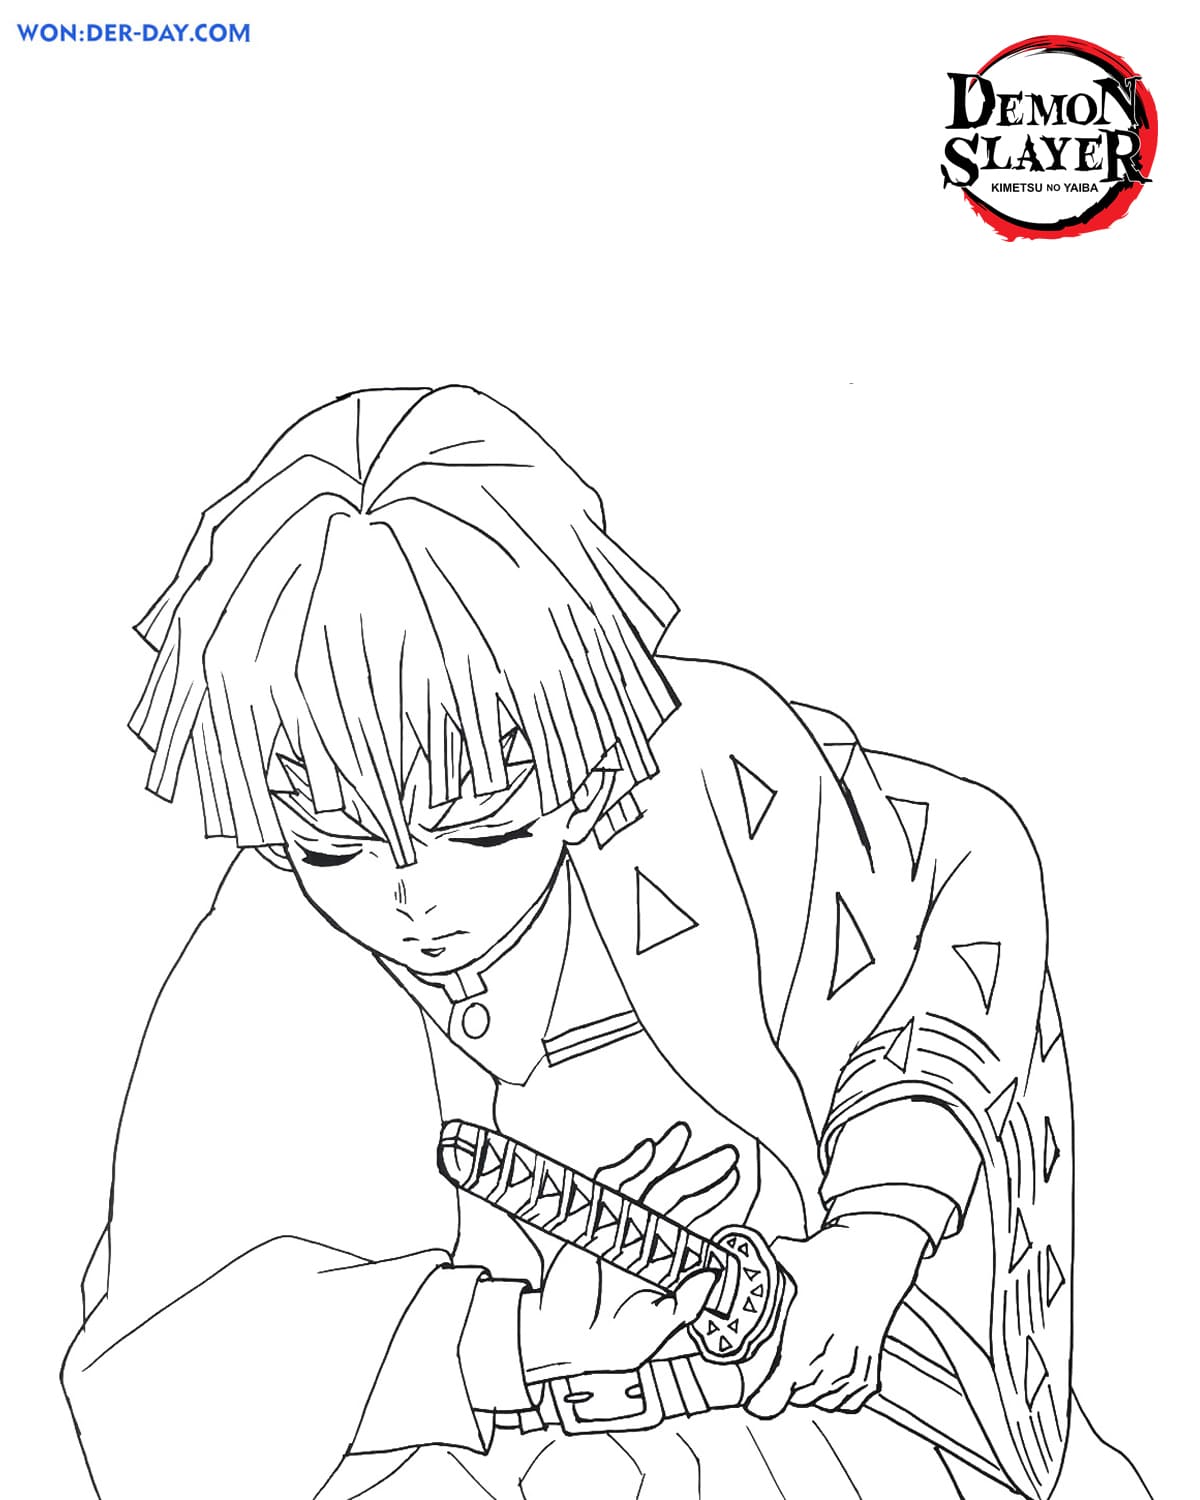 Anime Coloring Pages Demon Slayer  Demon Slayer coloring pages ...